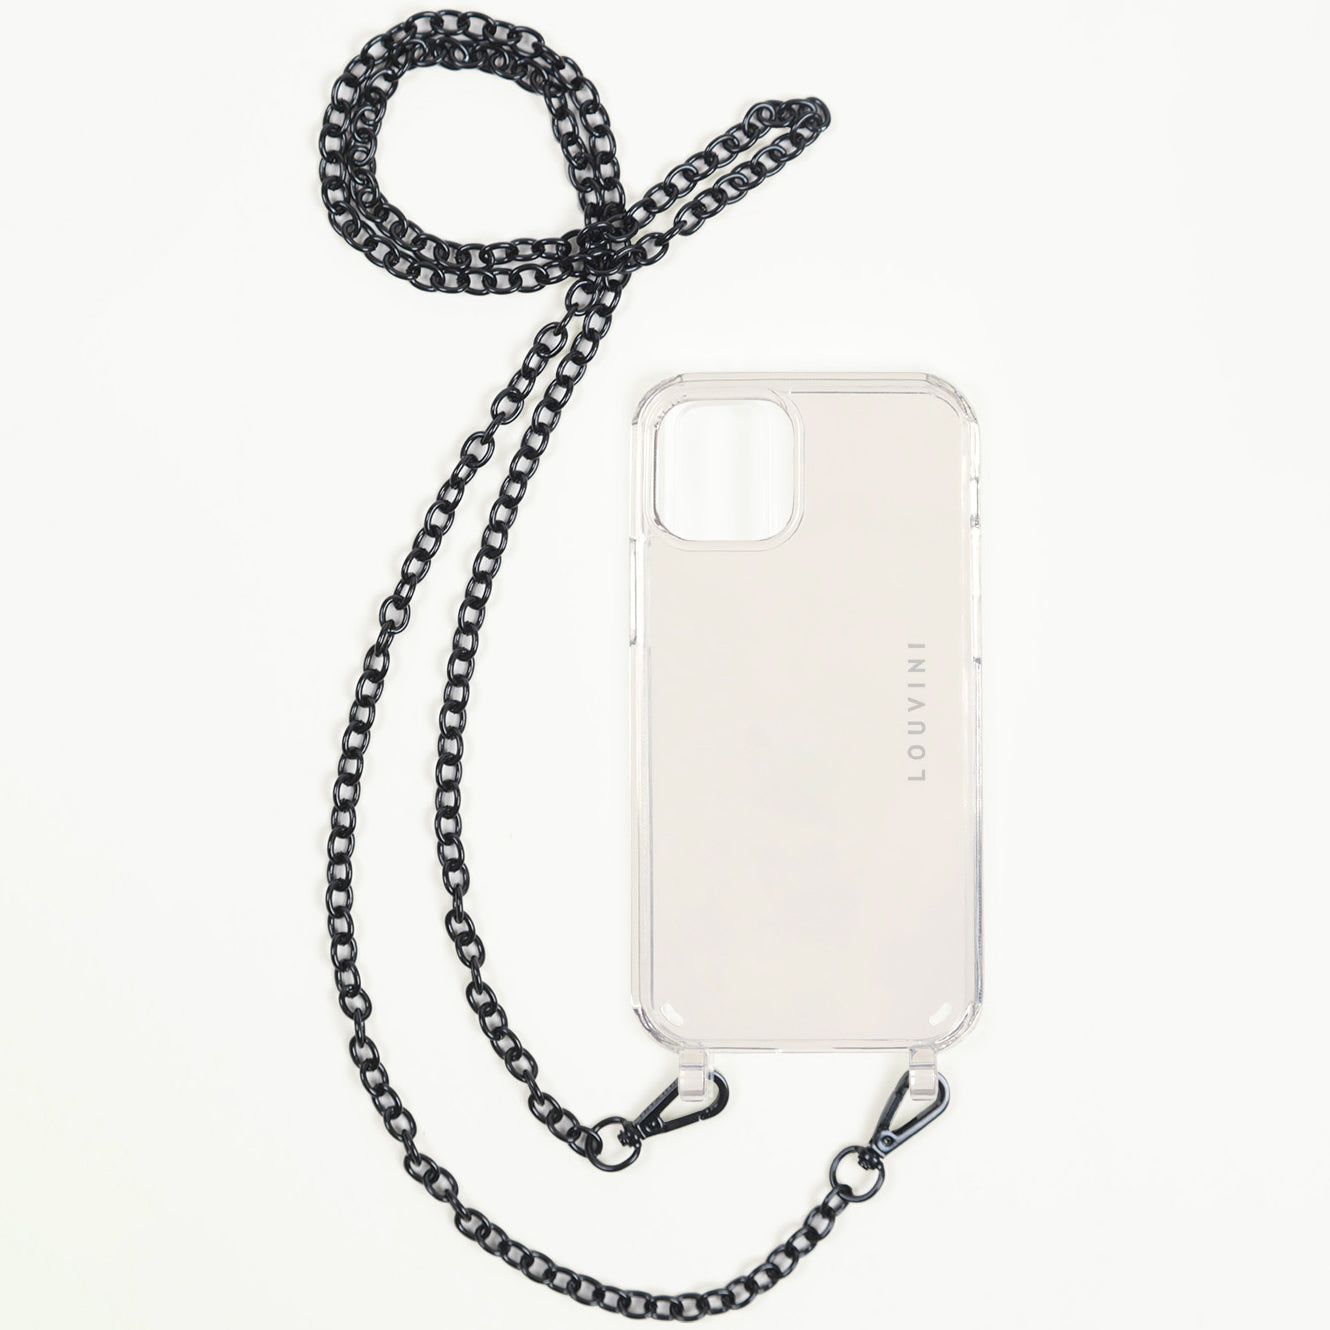 Charlie iPhone Case & Alice Black Chain